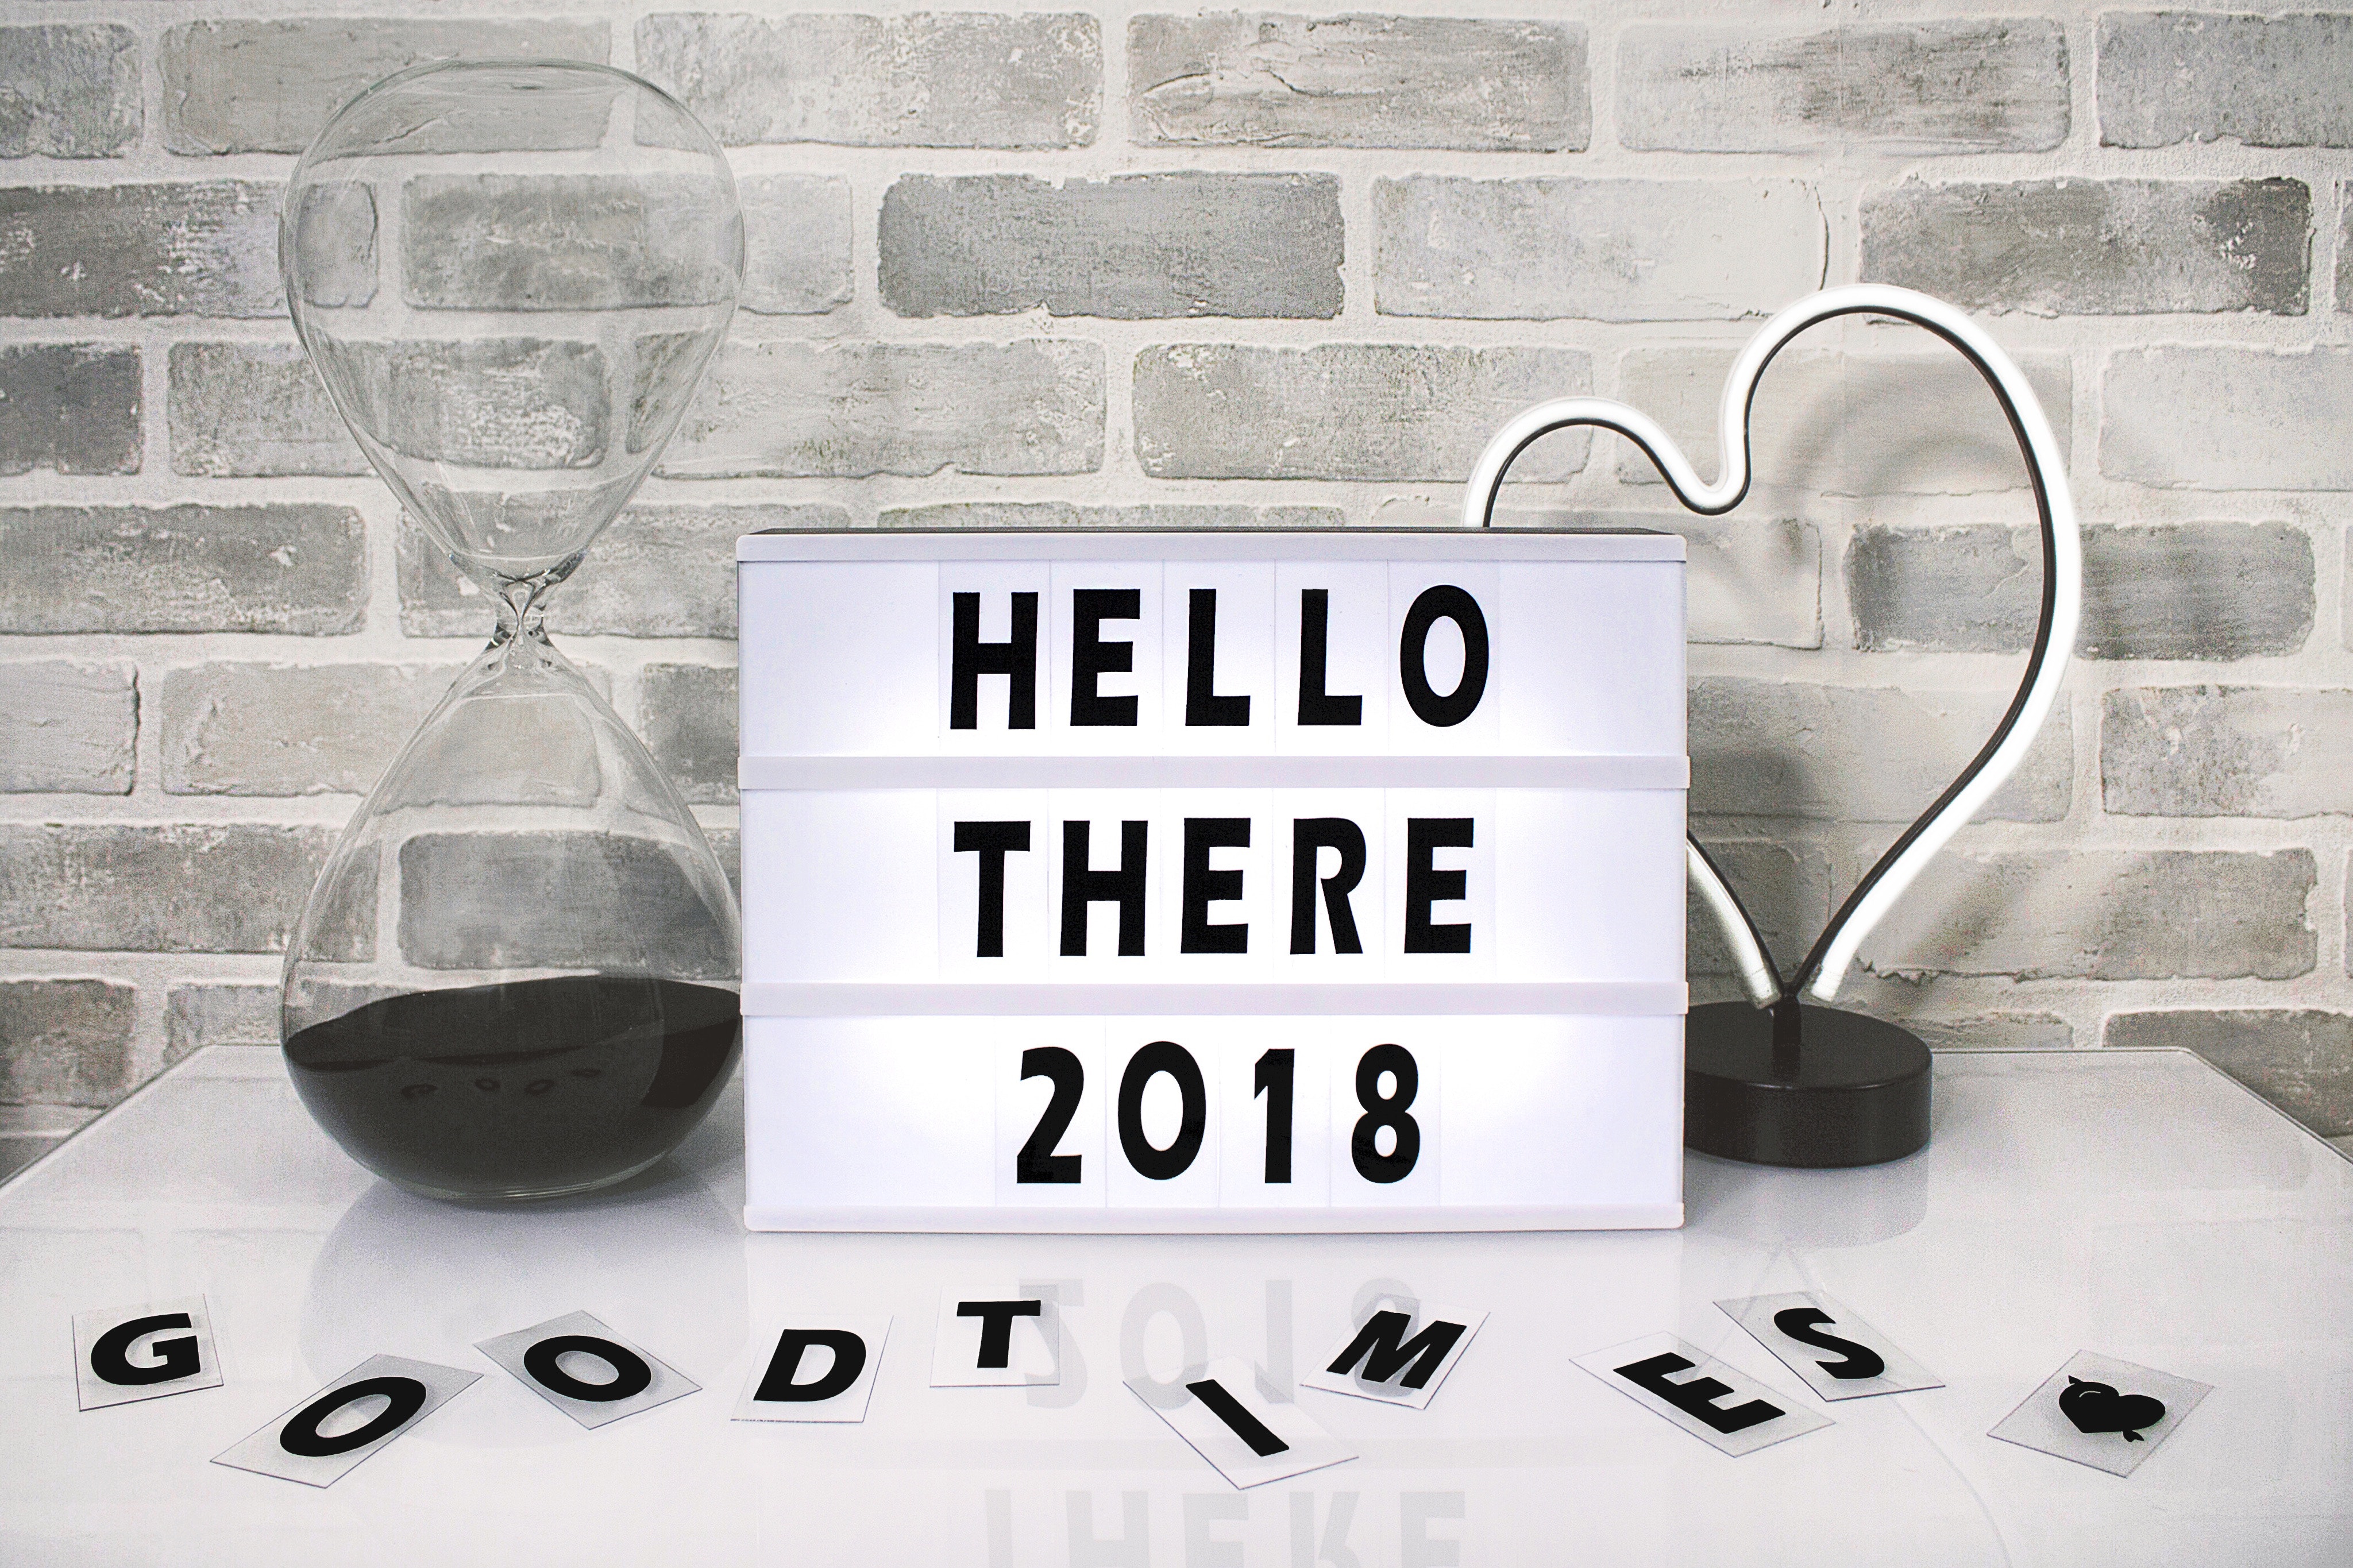 White hello there 2018 printed board against gray wall photo